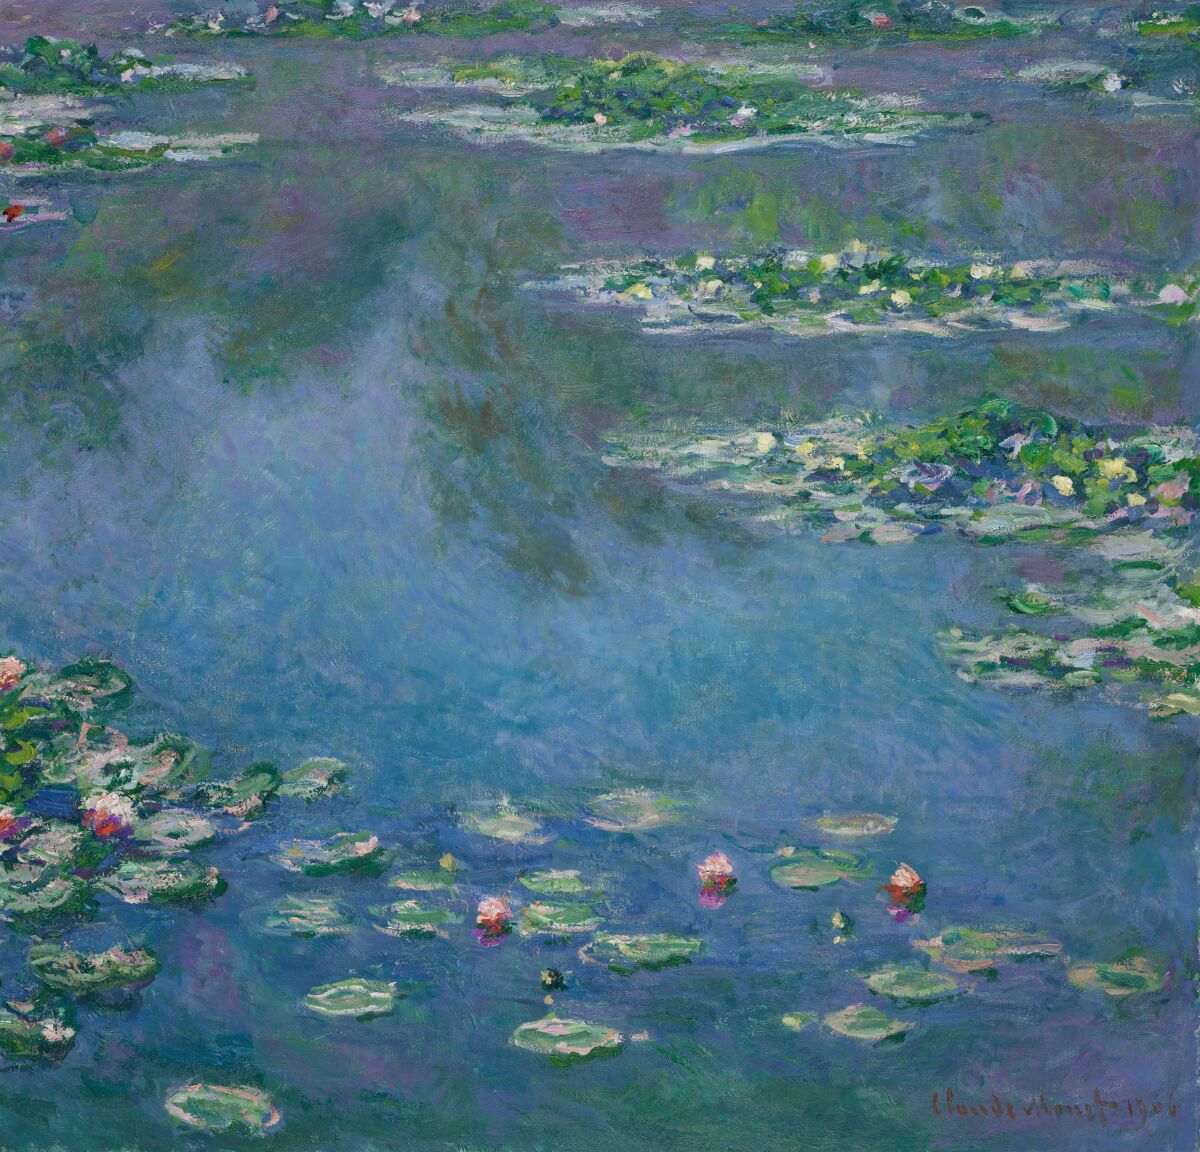 A painting of a lily pond, trees and sky reflected in the surface of the water.